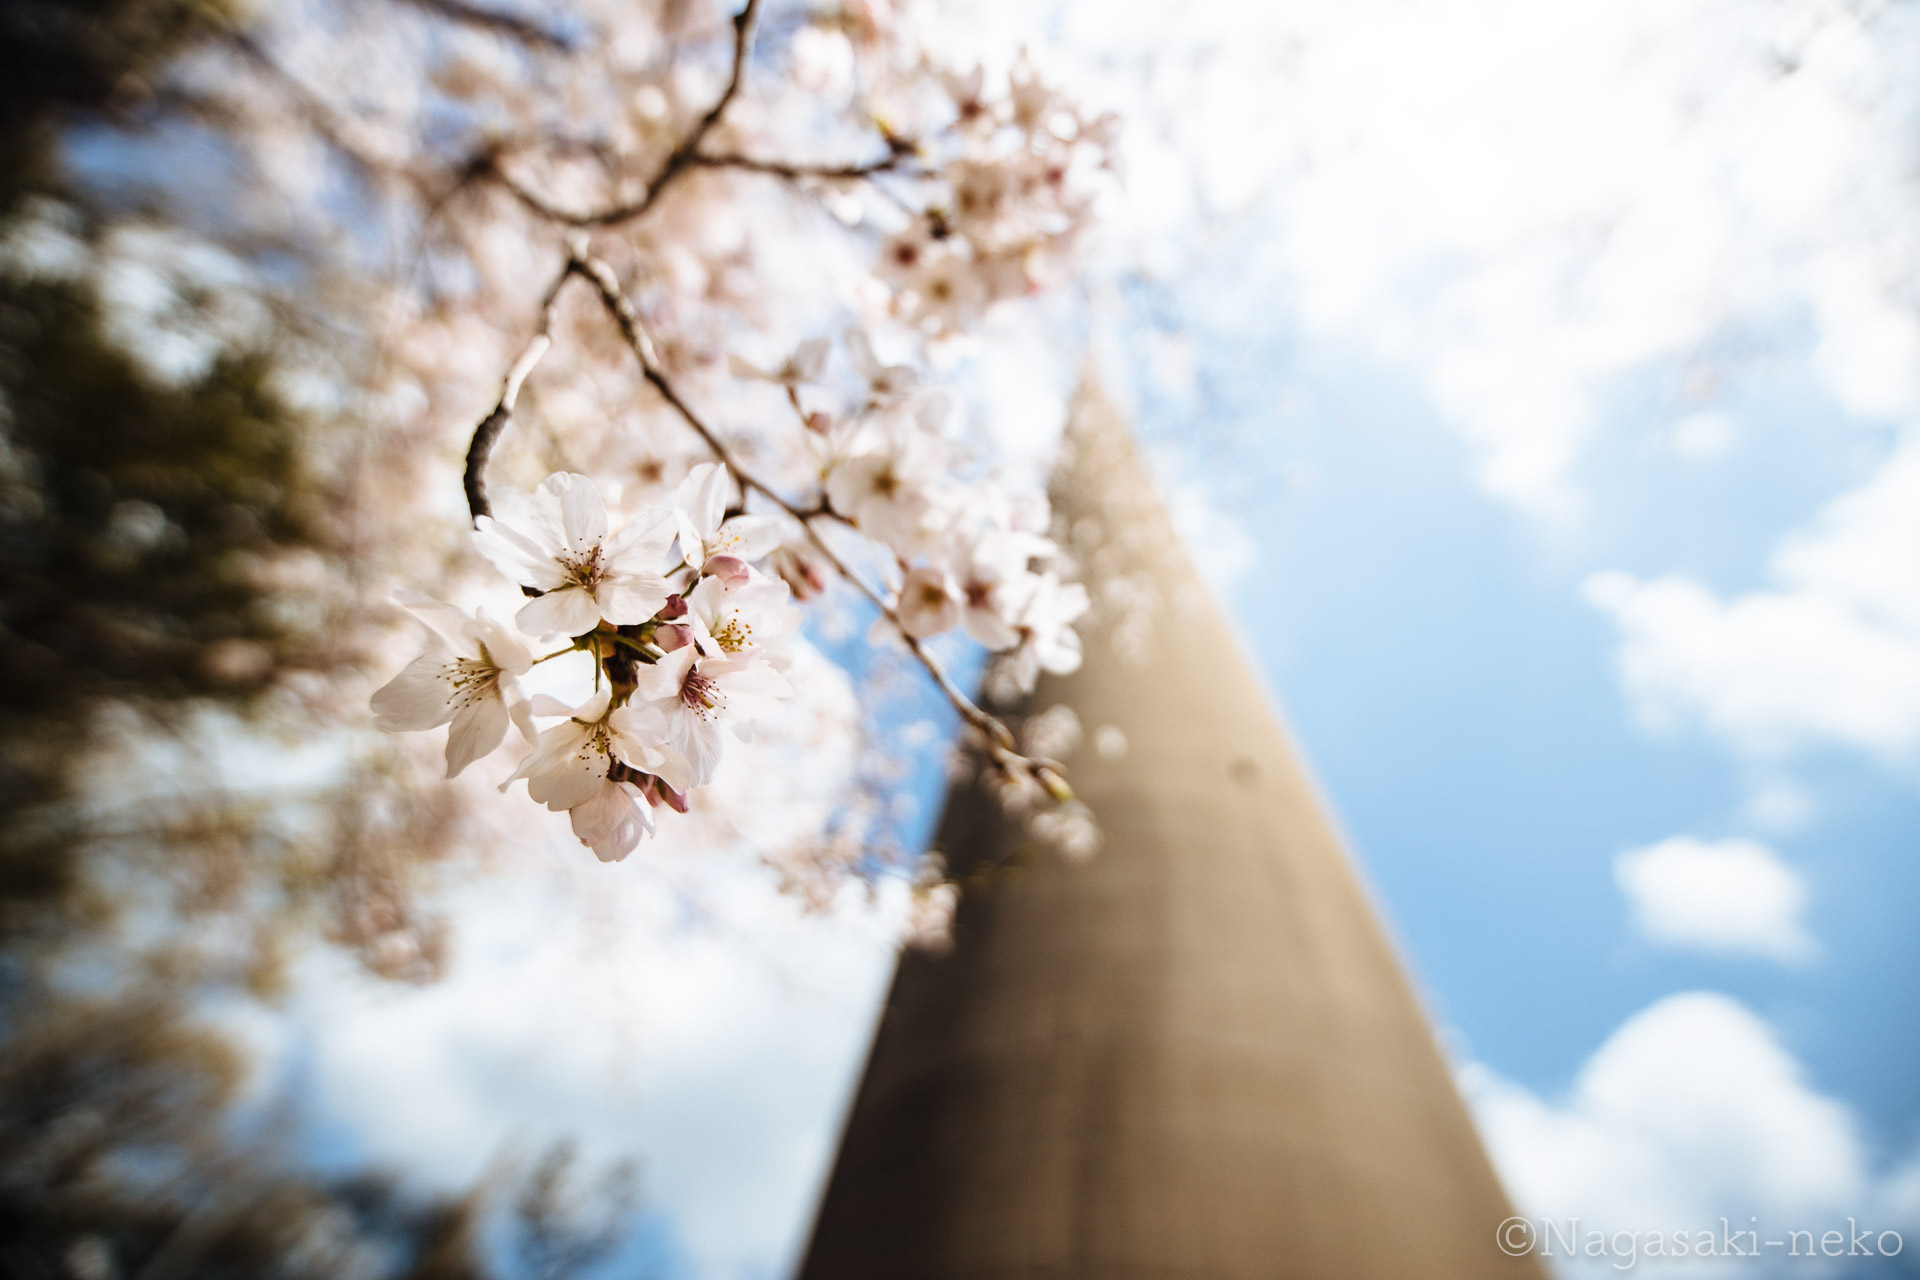 Cherry blossoms at Hario transmitter